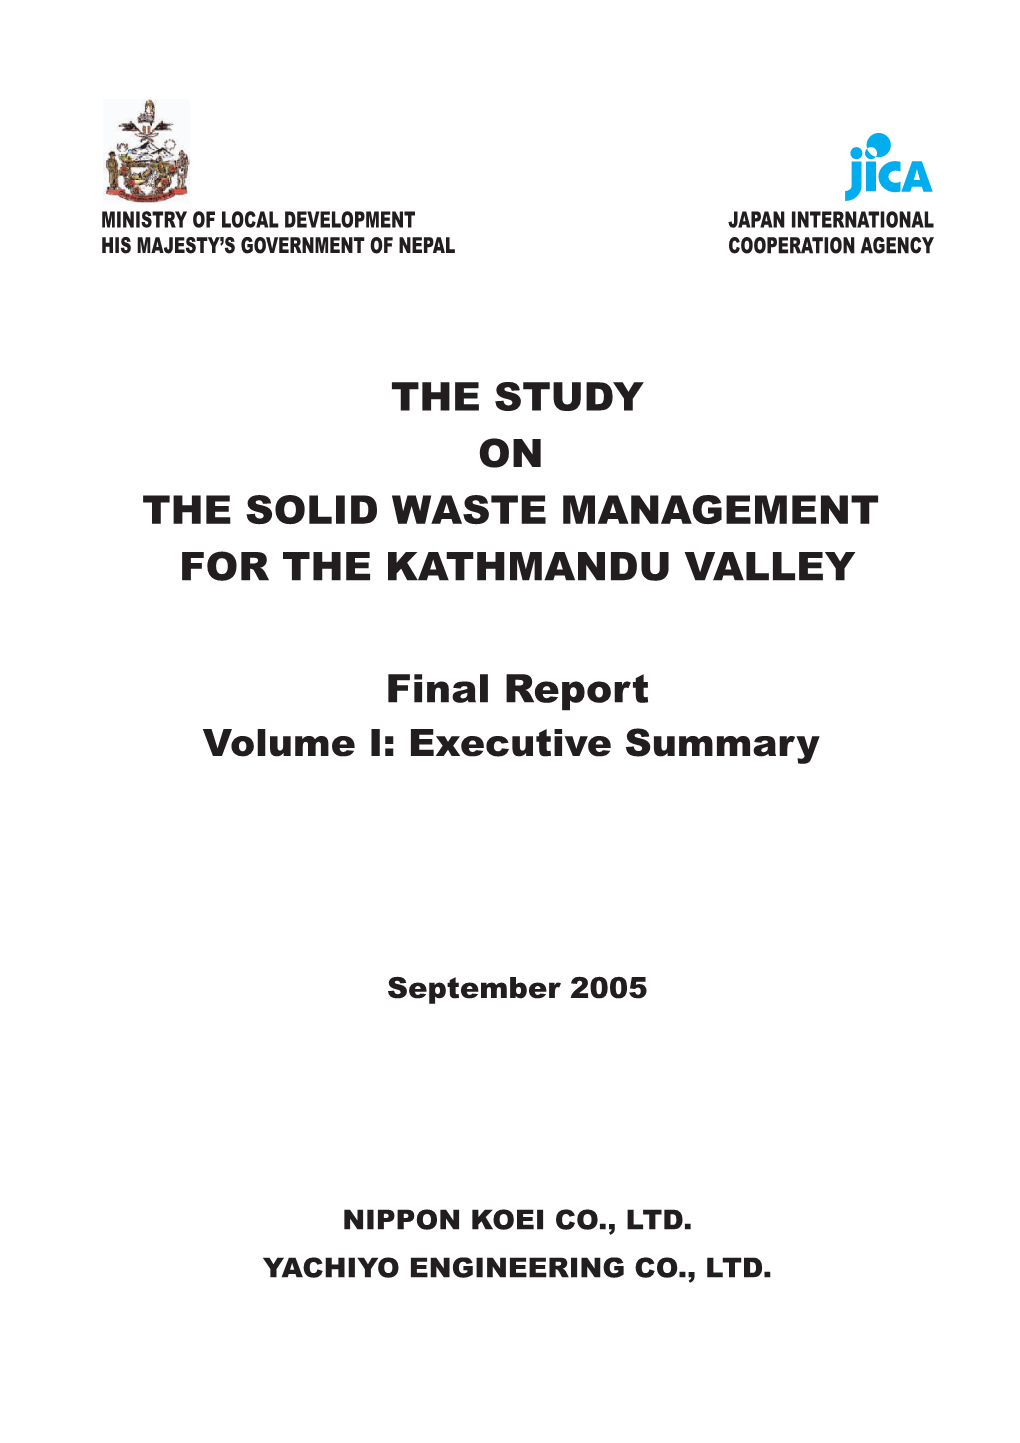 THE STUDY on the SOLID WASTE MANAGEMENT for the KATHMANDU VALLEY Final Report